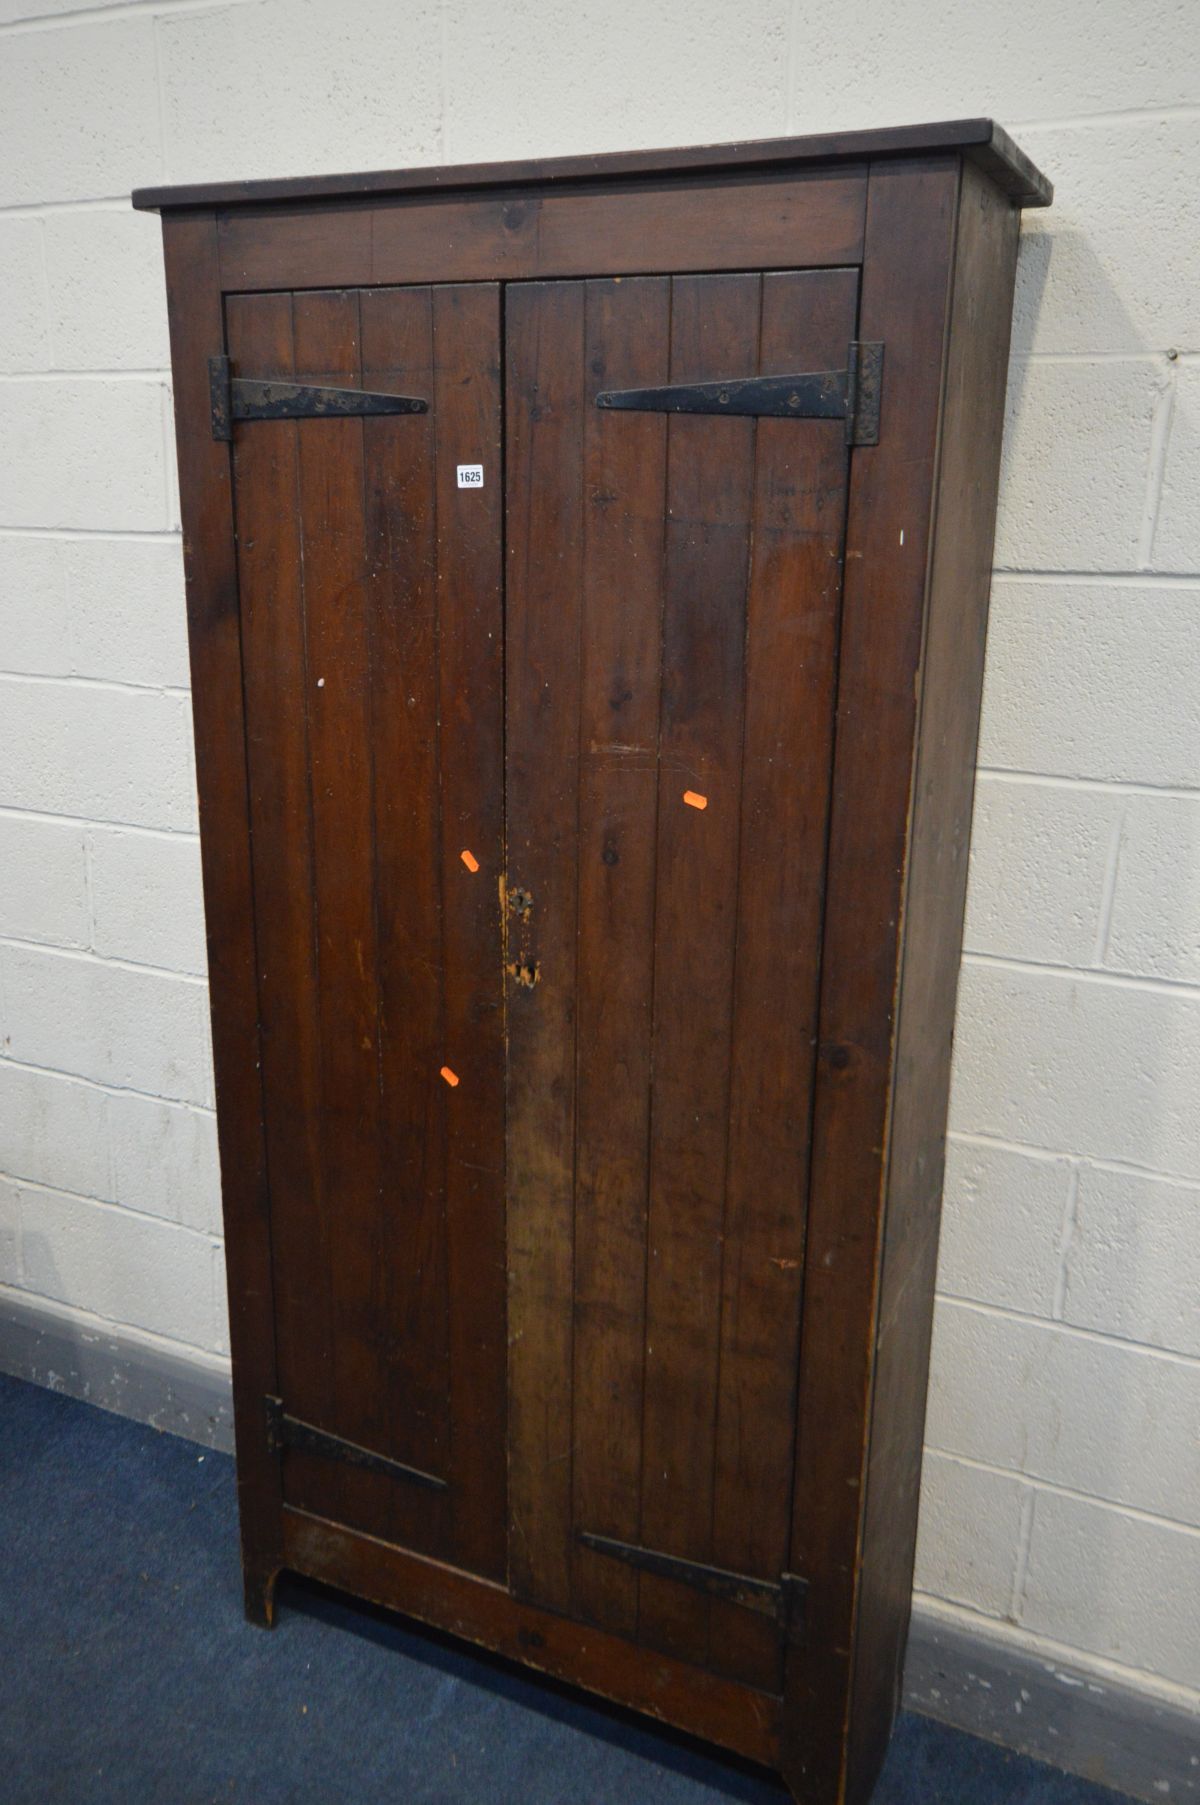 AN EARLY 20TH CENTURY SLATTED TWO DOOR CUPBOARD, width 96cm x depth 31cm x height 191cm - this lot - Image 2 of 3